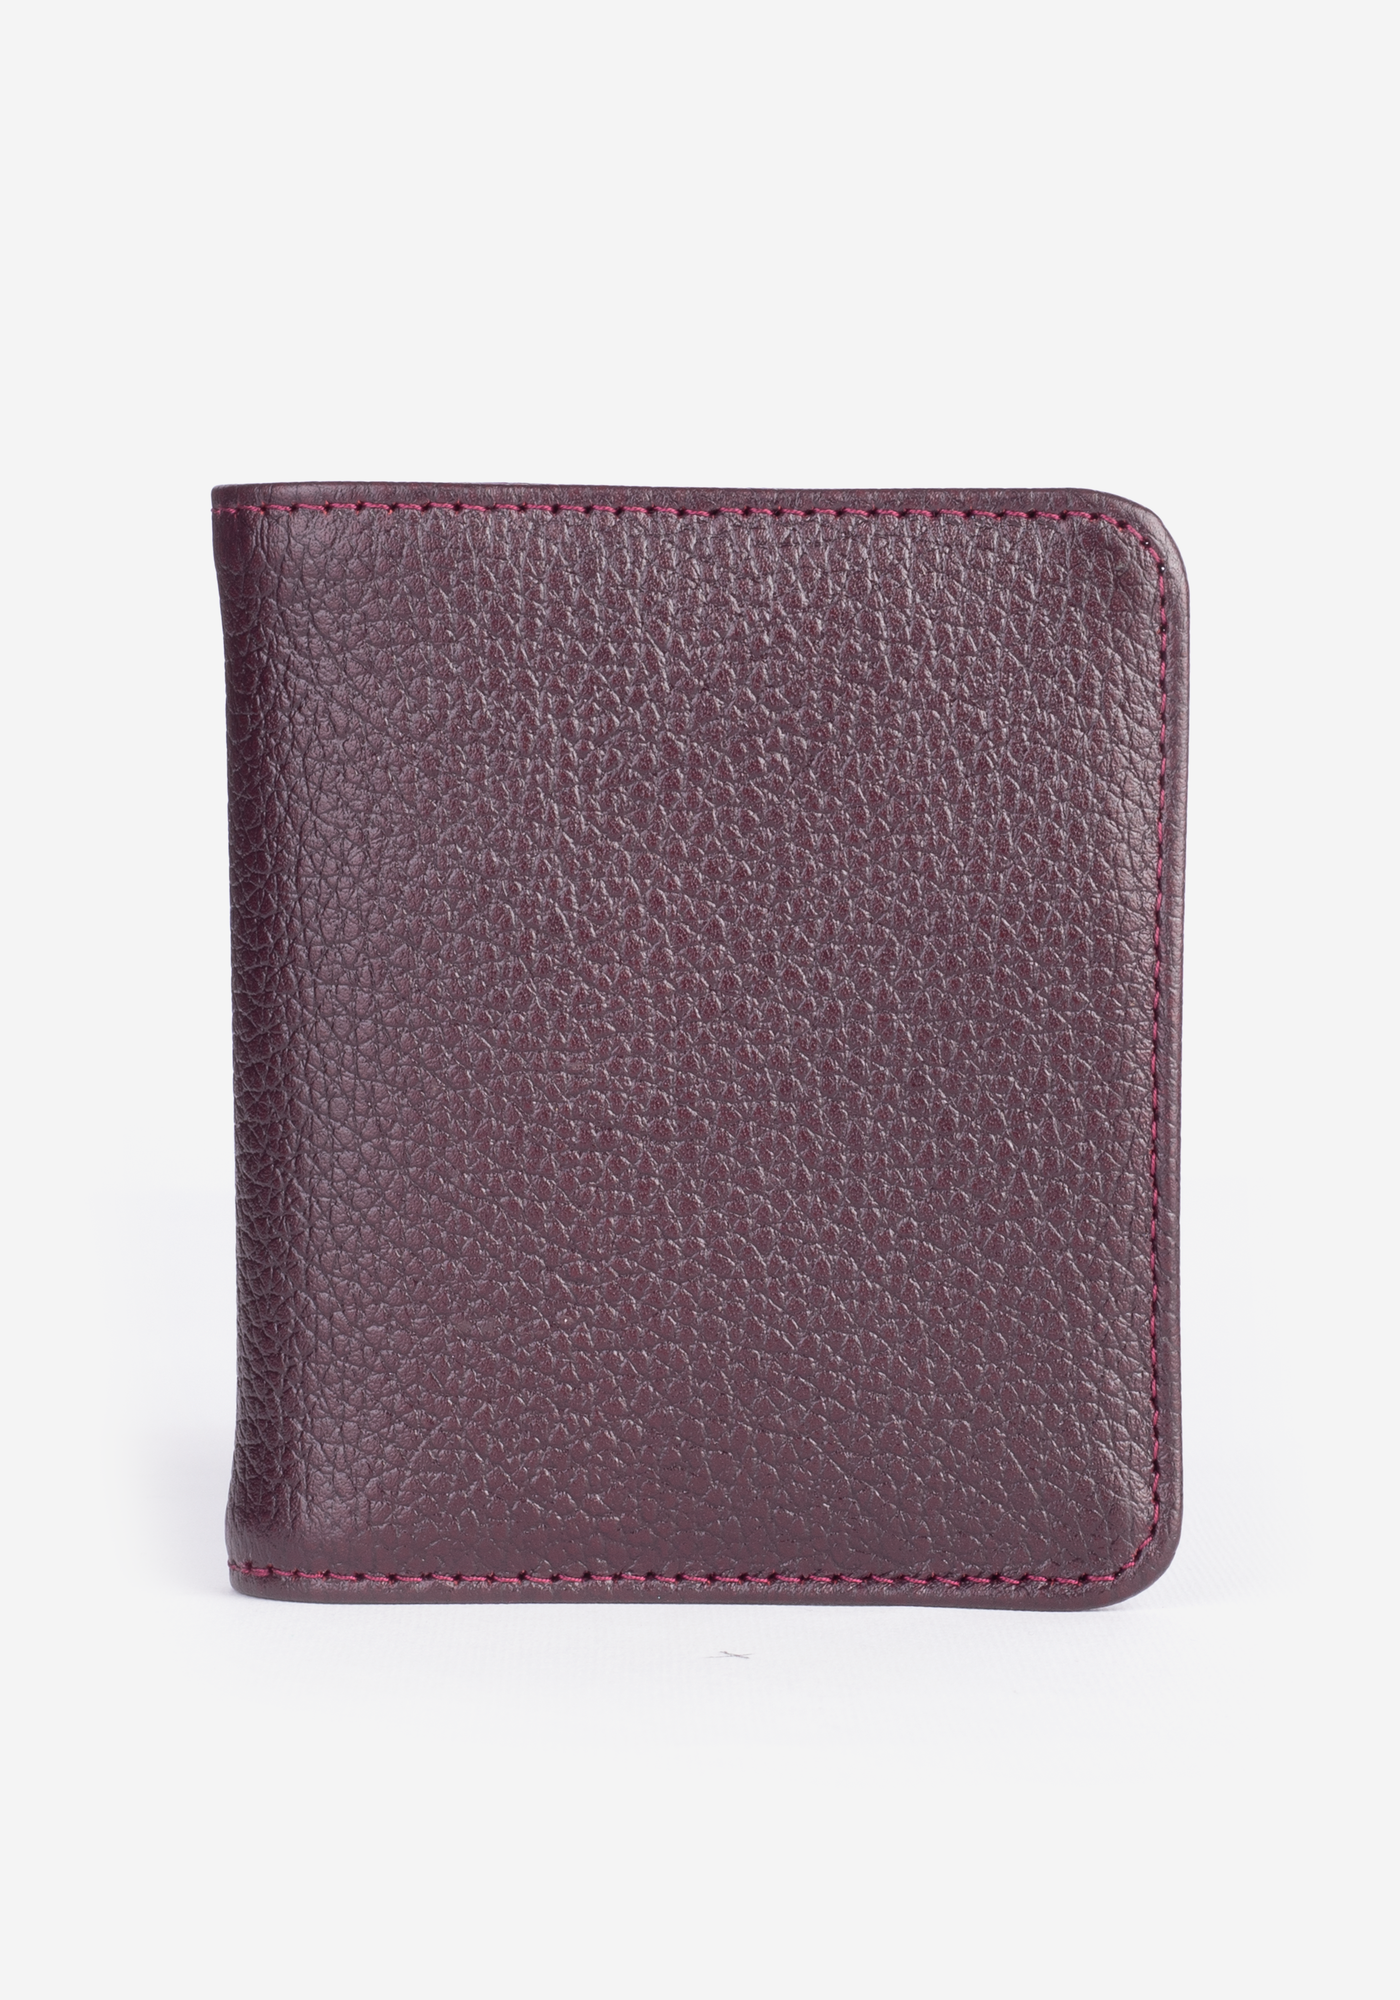 WAL026 / Burgundy Leather Wallet